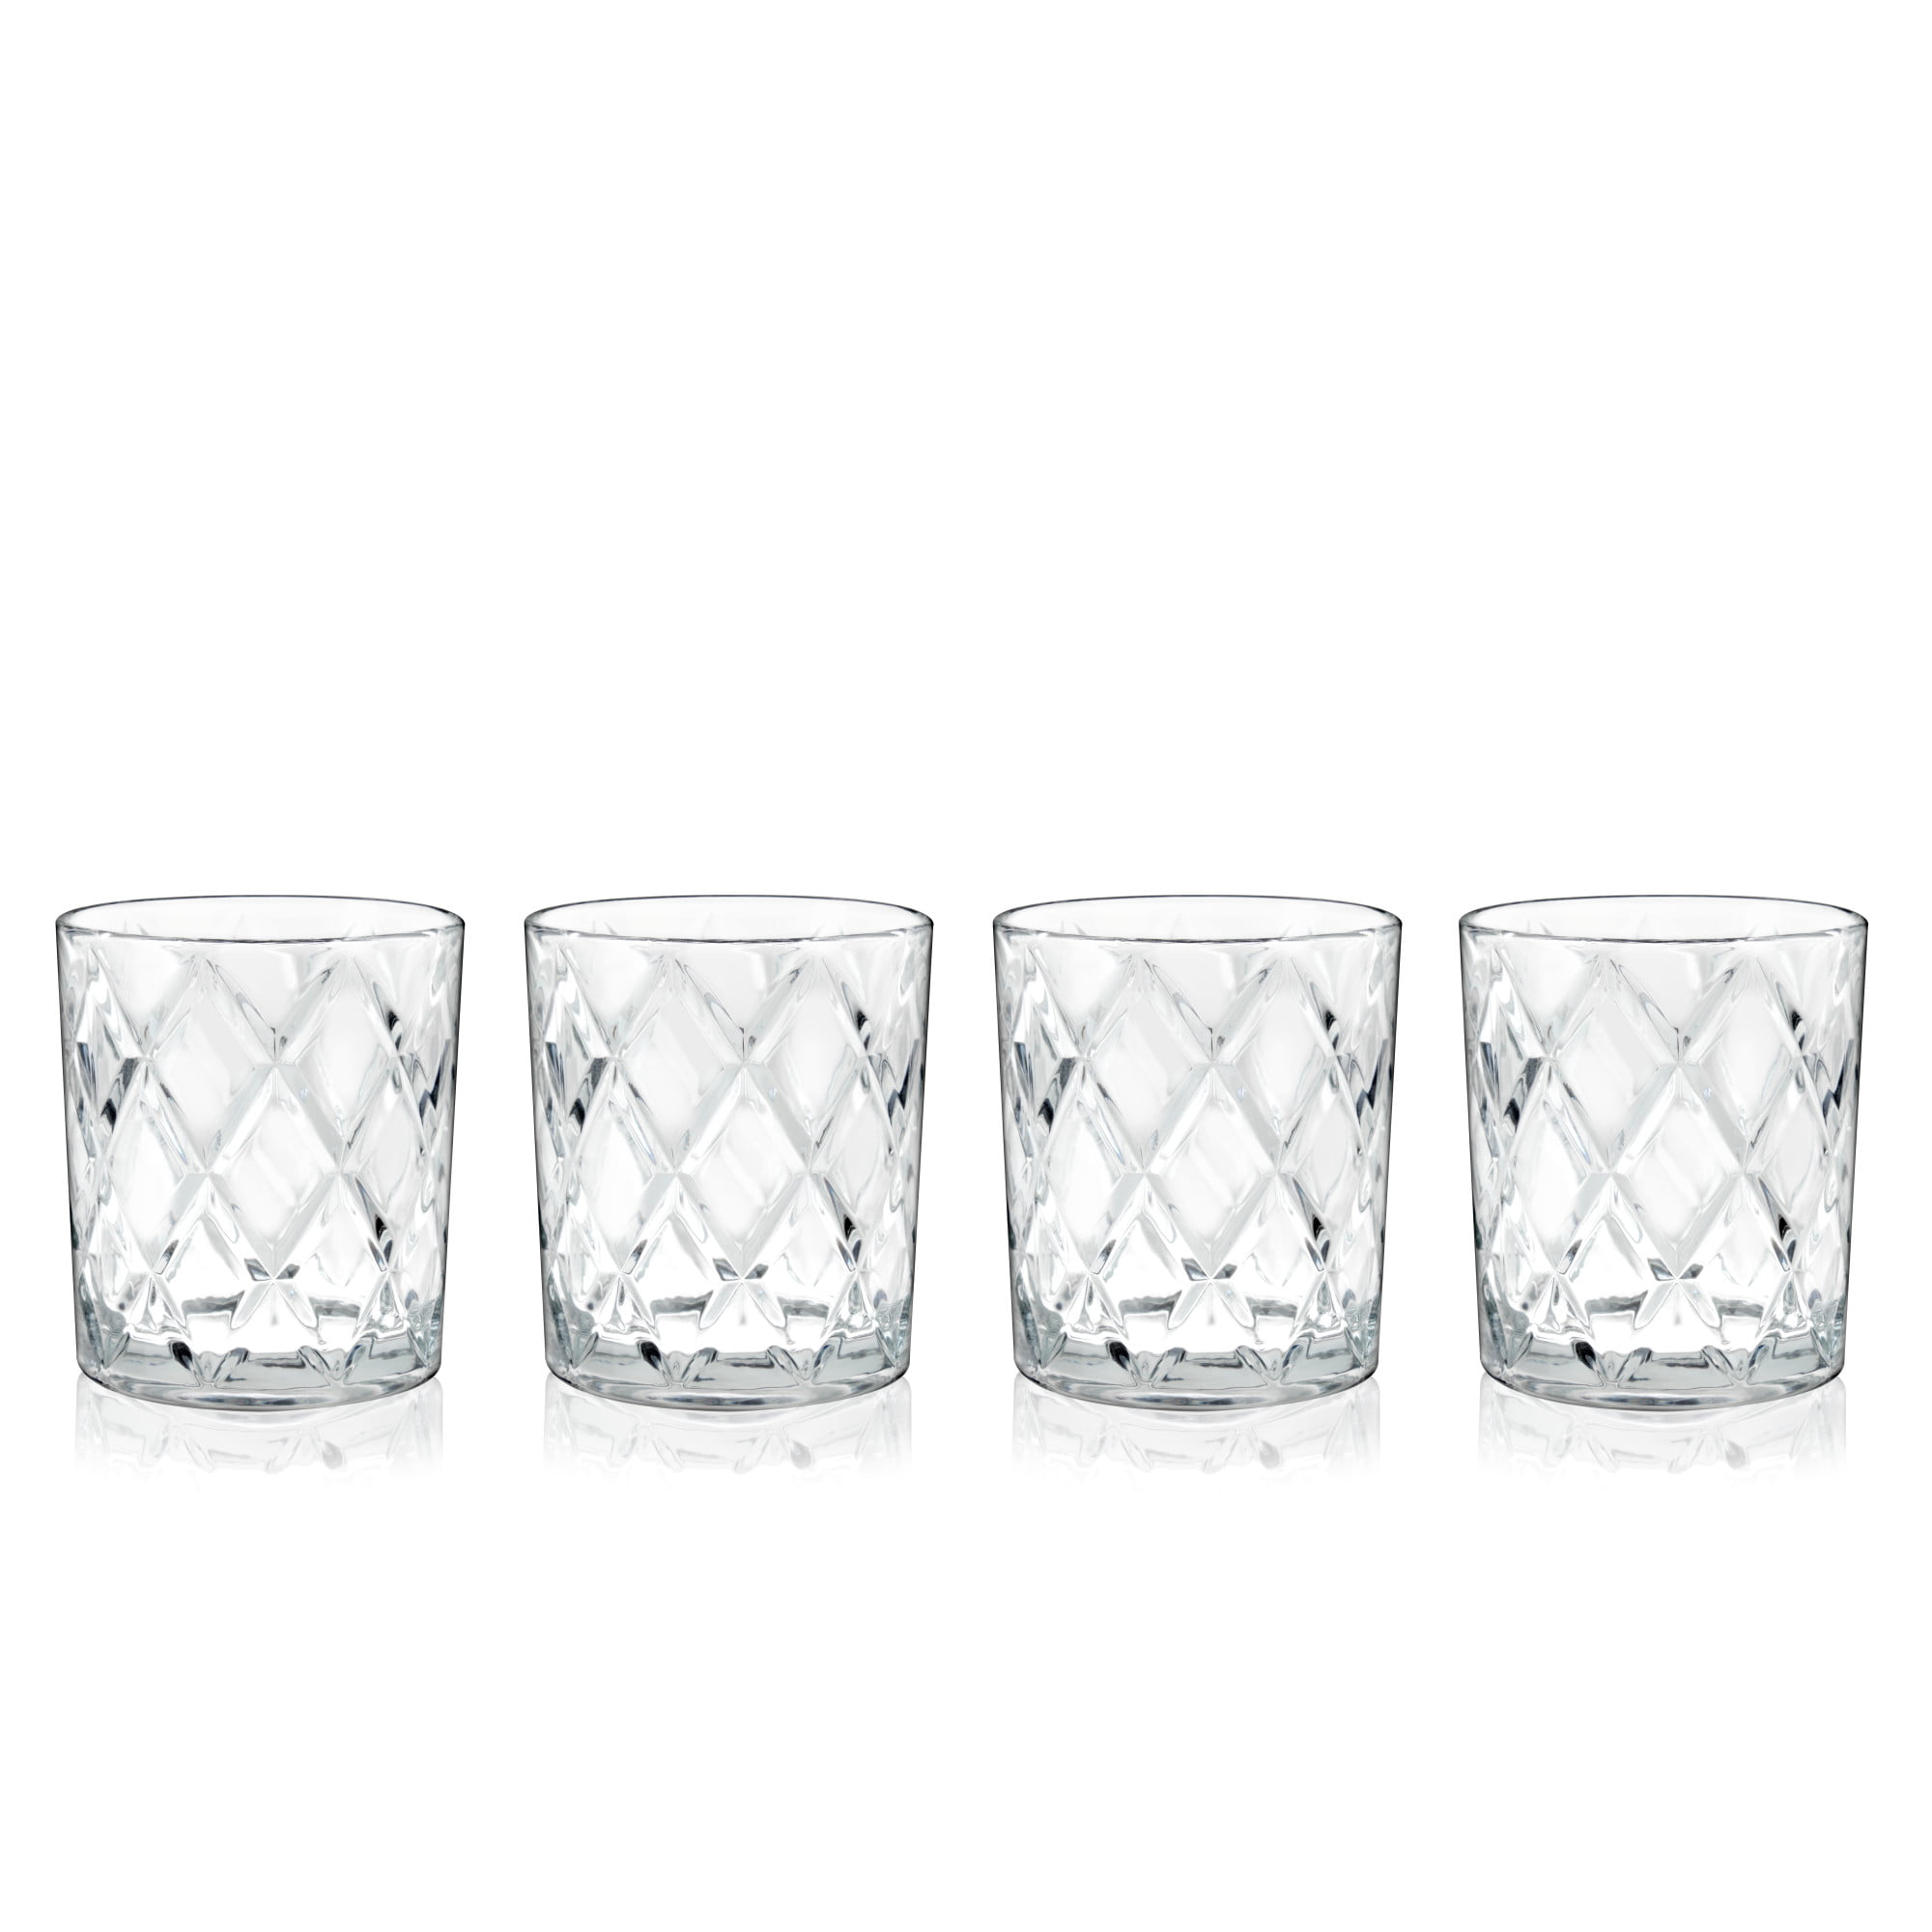 Sister.ly Drinkware Diamond Bottom Lowball Whiskey Glasses, Set of 2, 8 Ounces, Size: One size, Clear